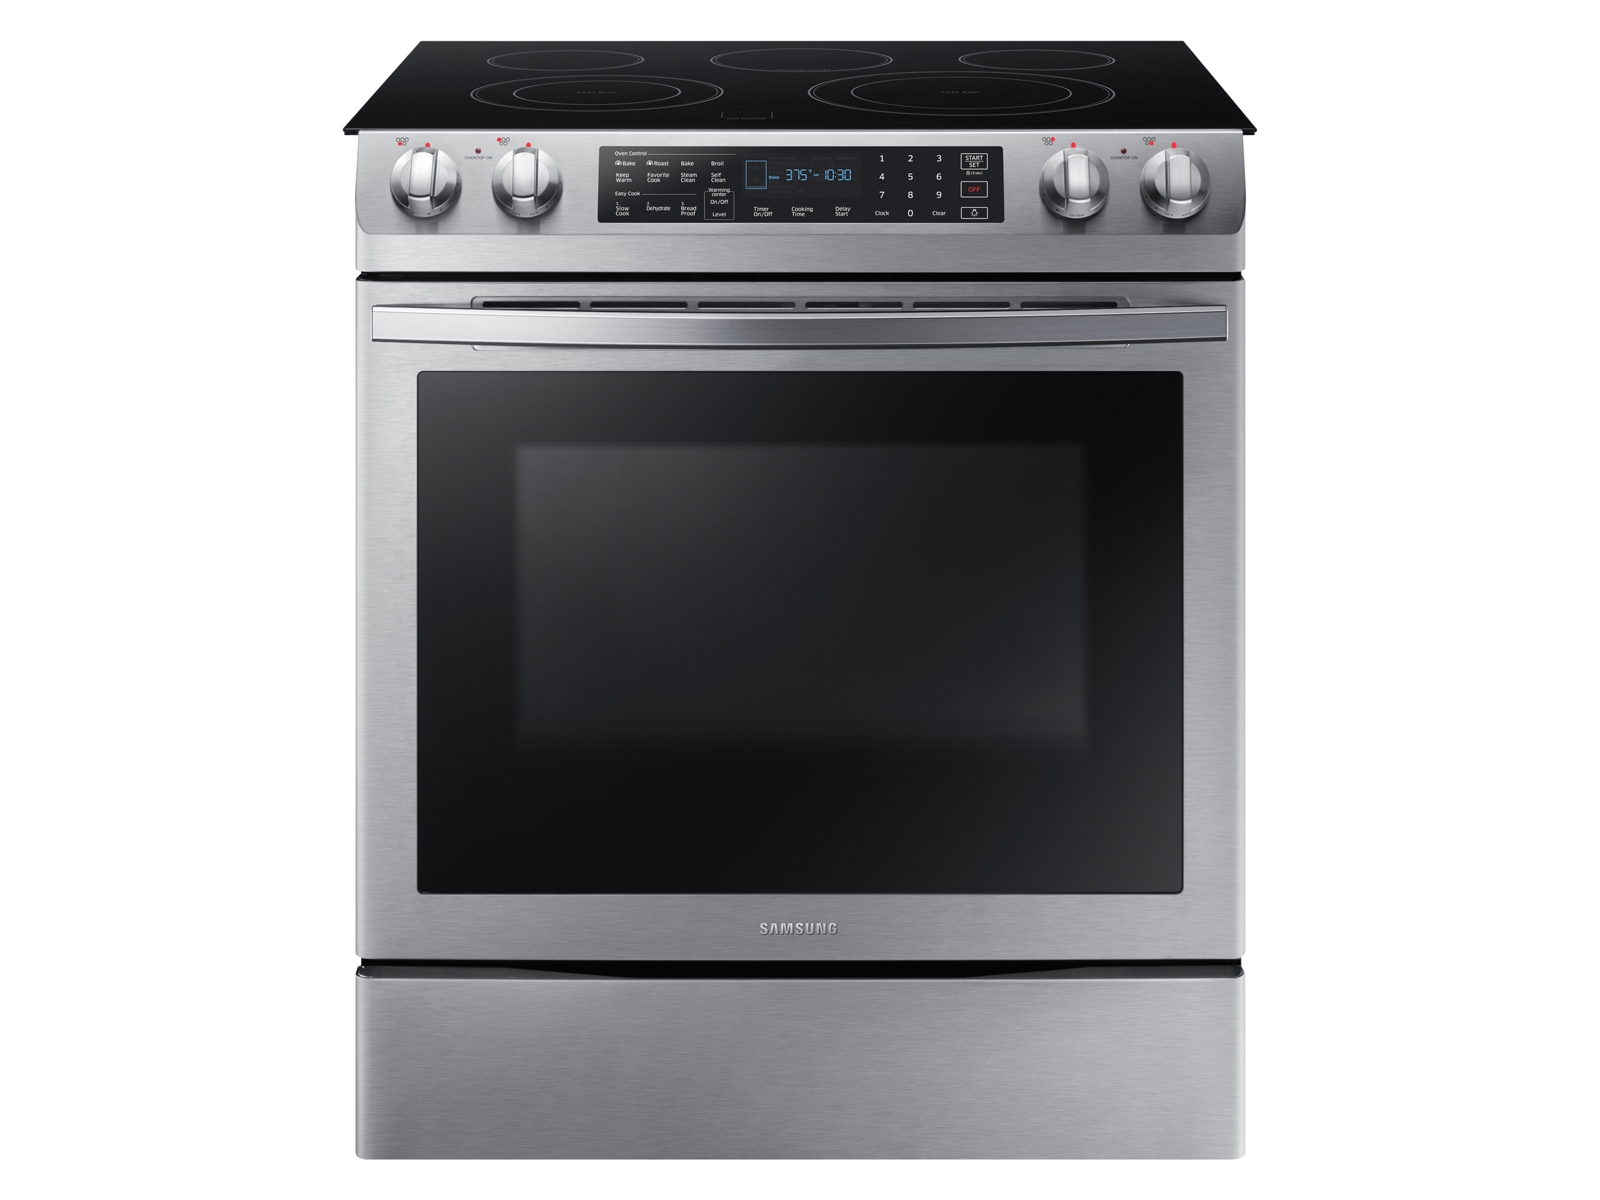 Samsung 1000W Built-In Microwave Hood Combo - 1.9 cu ft - Stainless Steel